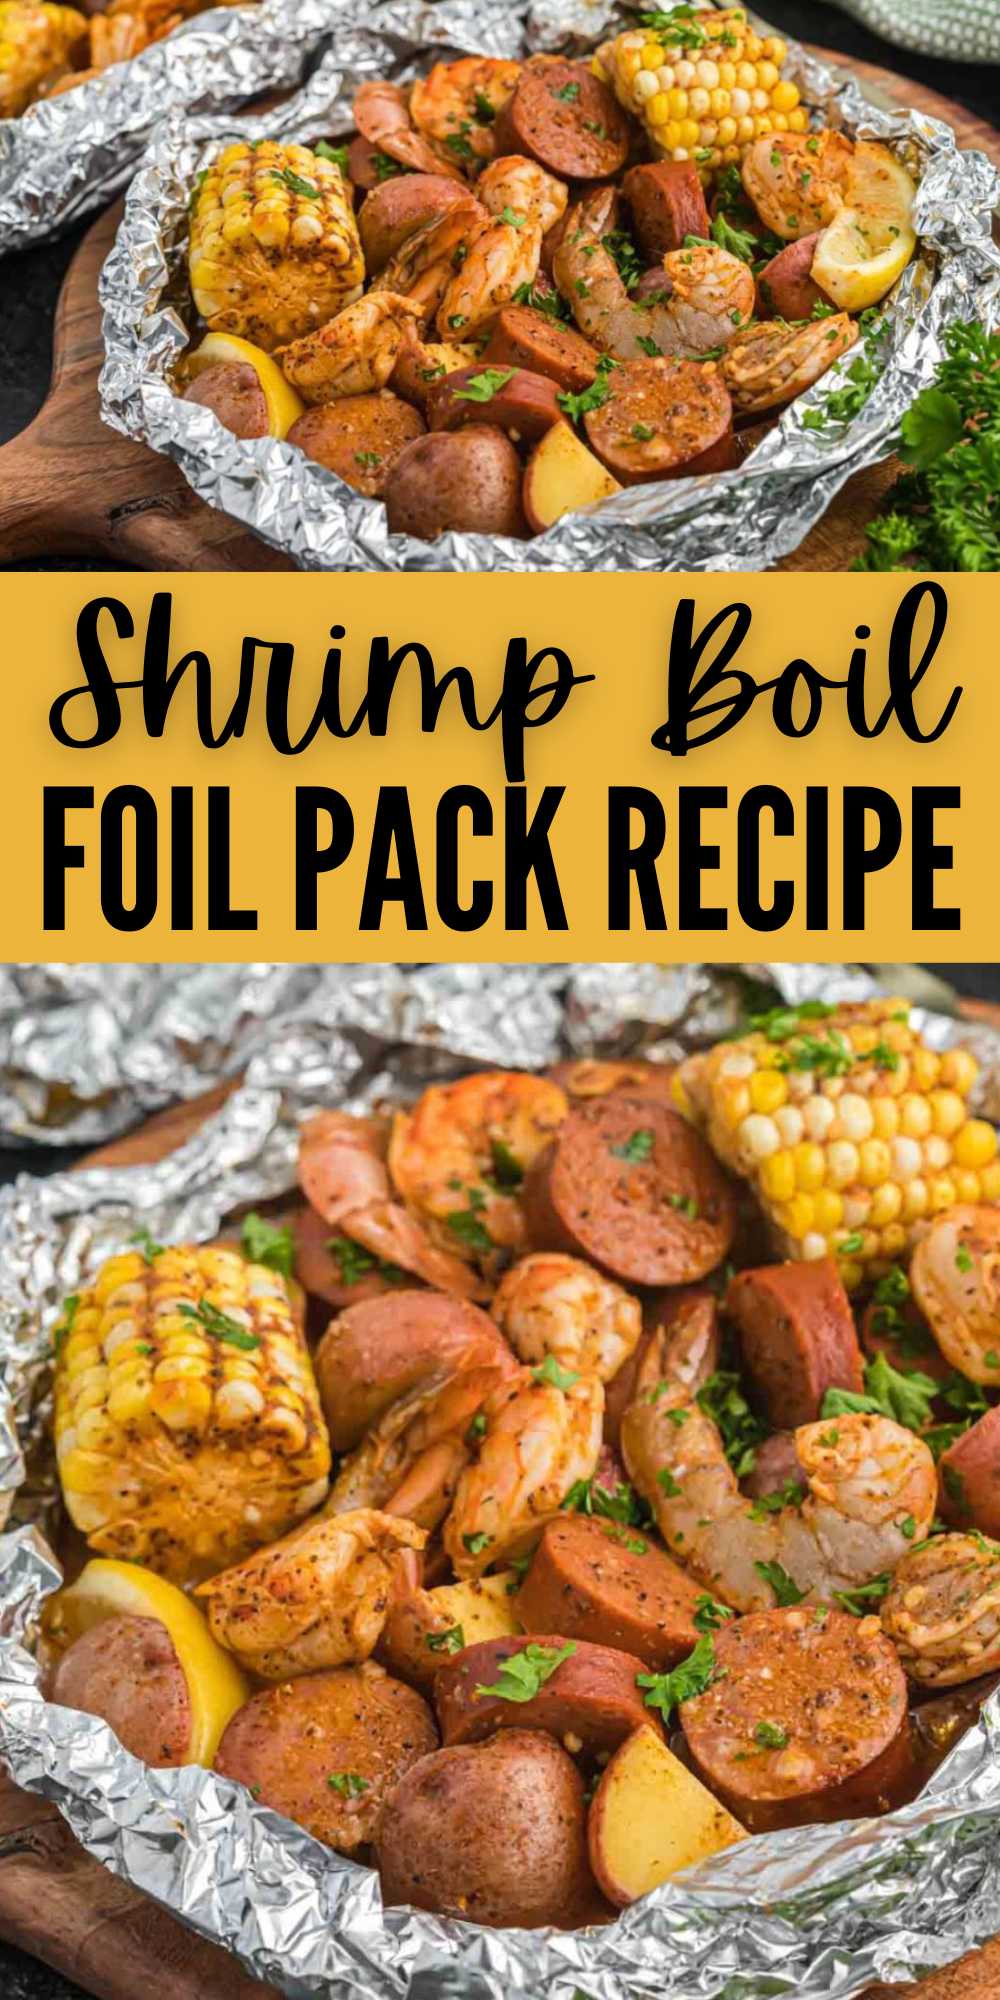 Shrimp Boil Foil Pack is a tasty dinner for the grill or oven. Shrimp, sausage, corn and more are tossed in butter and Cajun seasoning. The perfect way to cook a shrimp boil for a fun and easy meal. #eatingonadime #shrimpboilfoilpacks #shrimpboil #foilpacks